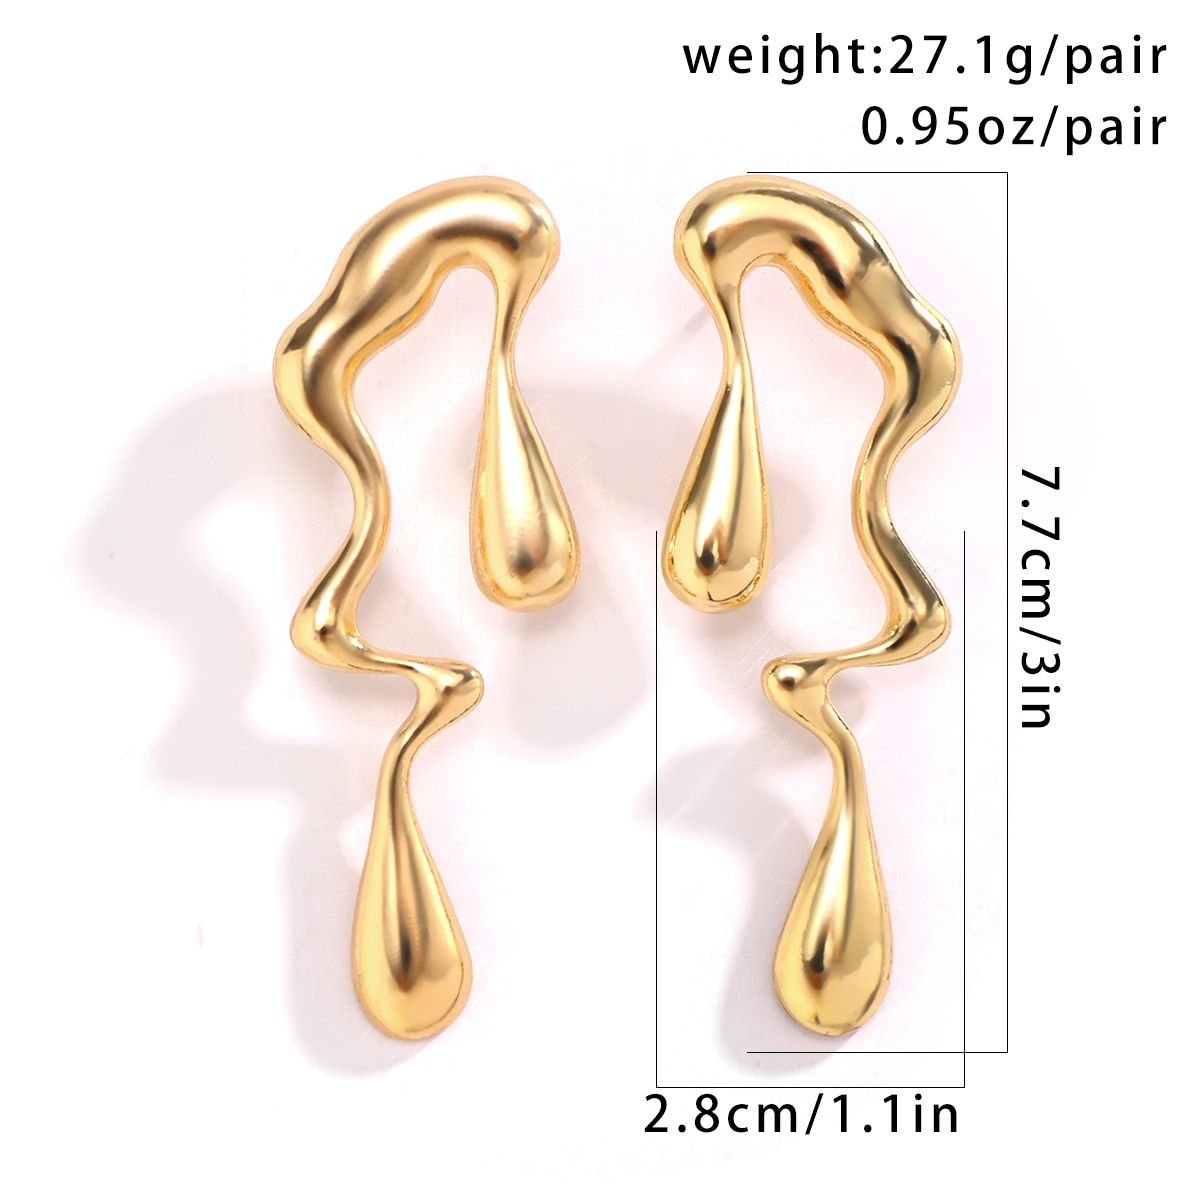 Vintage Gold Geometric Water Drop Earrings, displayed on a white background with dimensions and weight labels provided, perfect for new fashion trends.